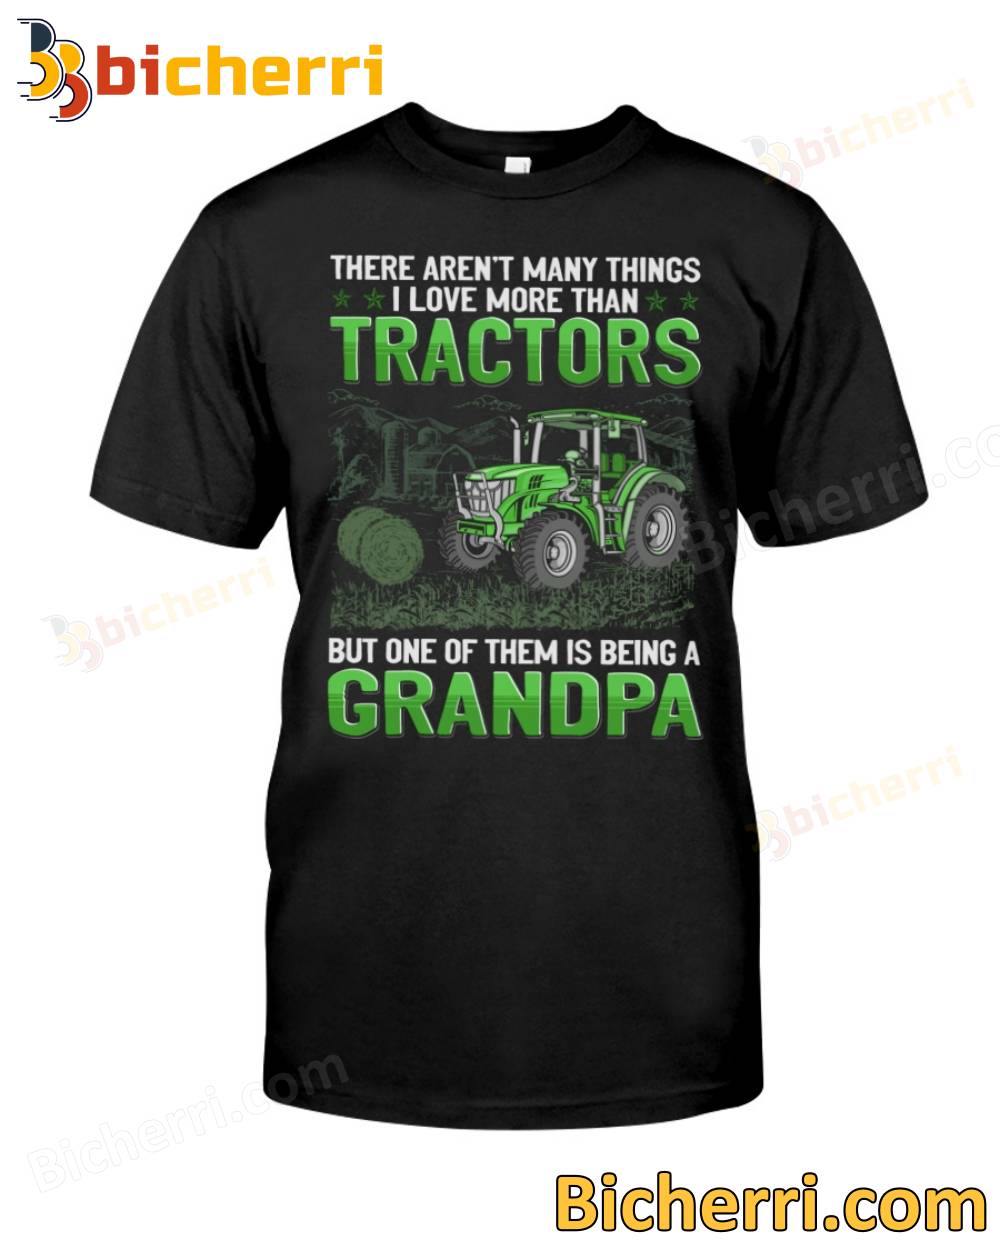 There Aren't Many Things I Love More Than Tractors But One Of Them Is Being A Grandpa T-shirt